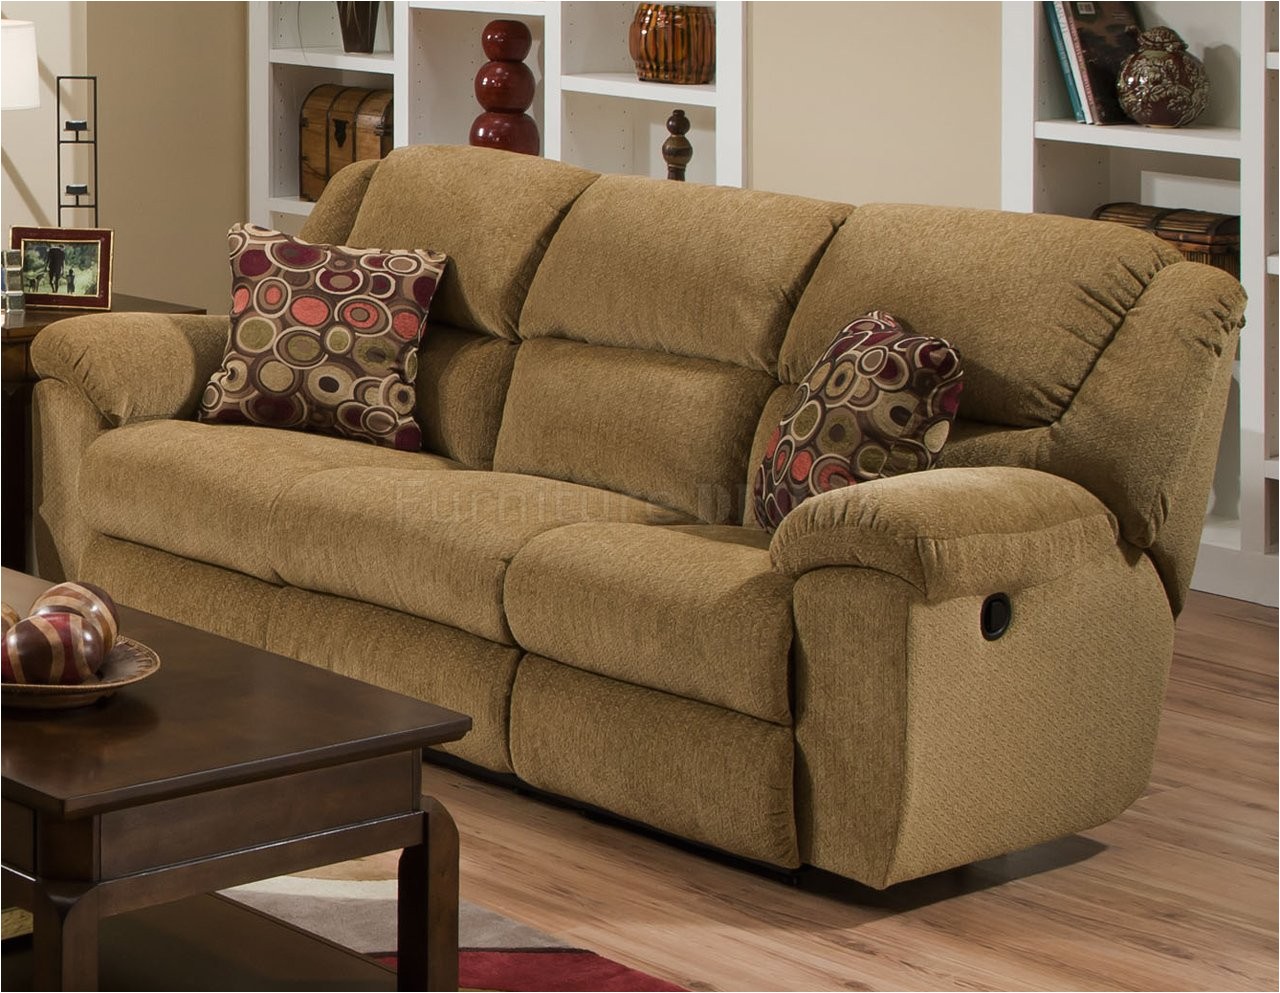 recliner sofa slipcovers walmart fabric recliner sofa things mag sofa chair bench couch of recliner sofa